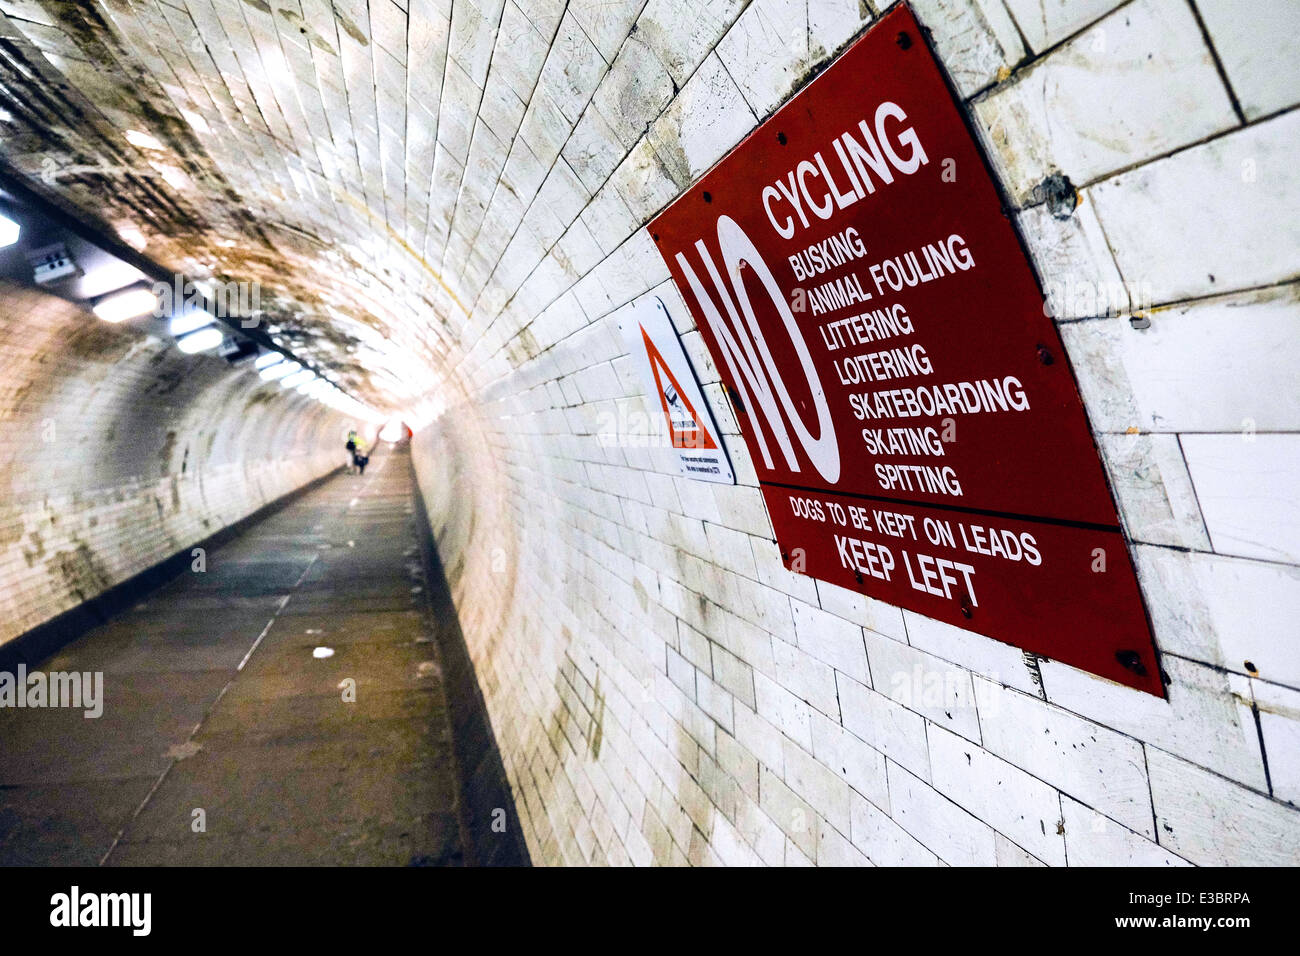 The Greenwich Foot Tunnel. Stock Photo